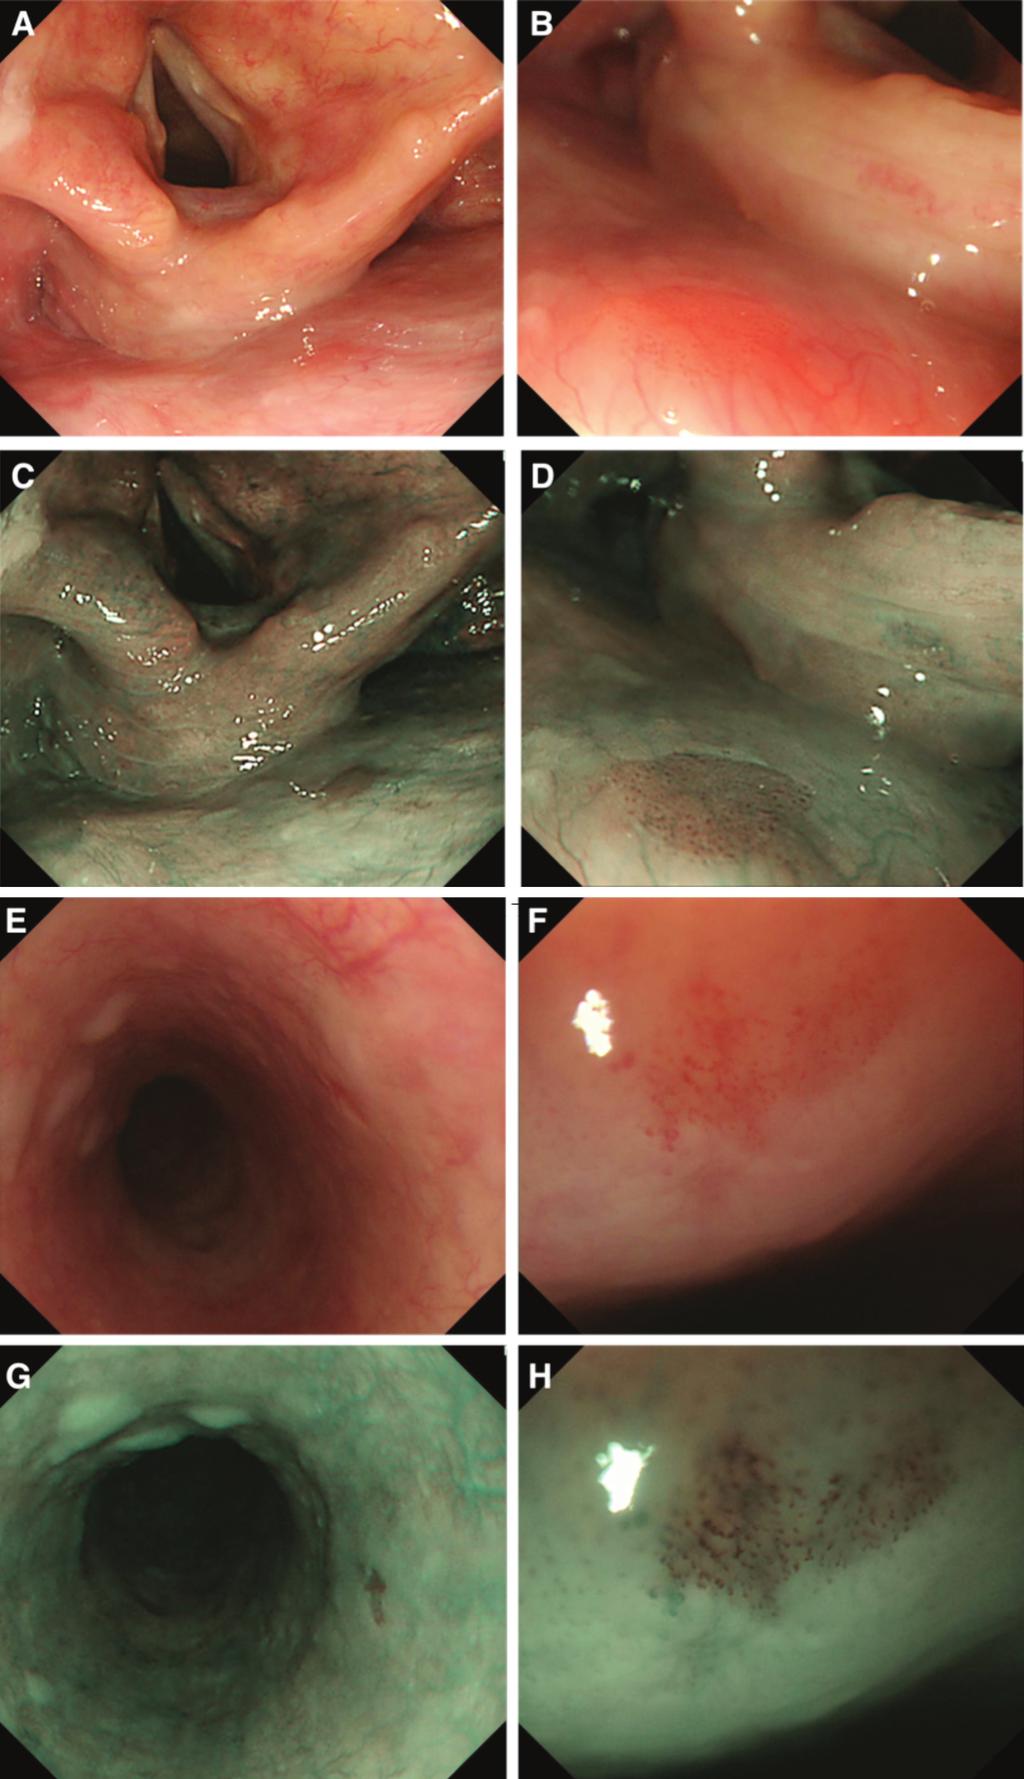 Muto et al Endoscopic Evaluation of Superficial Cancers In this study, the real-time on-site diagnosis was evaluated because making an accurate diagnosis during an examination is clinically more